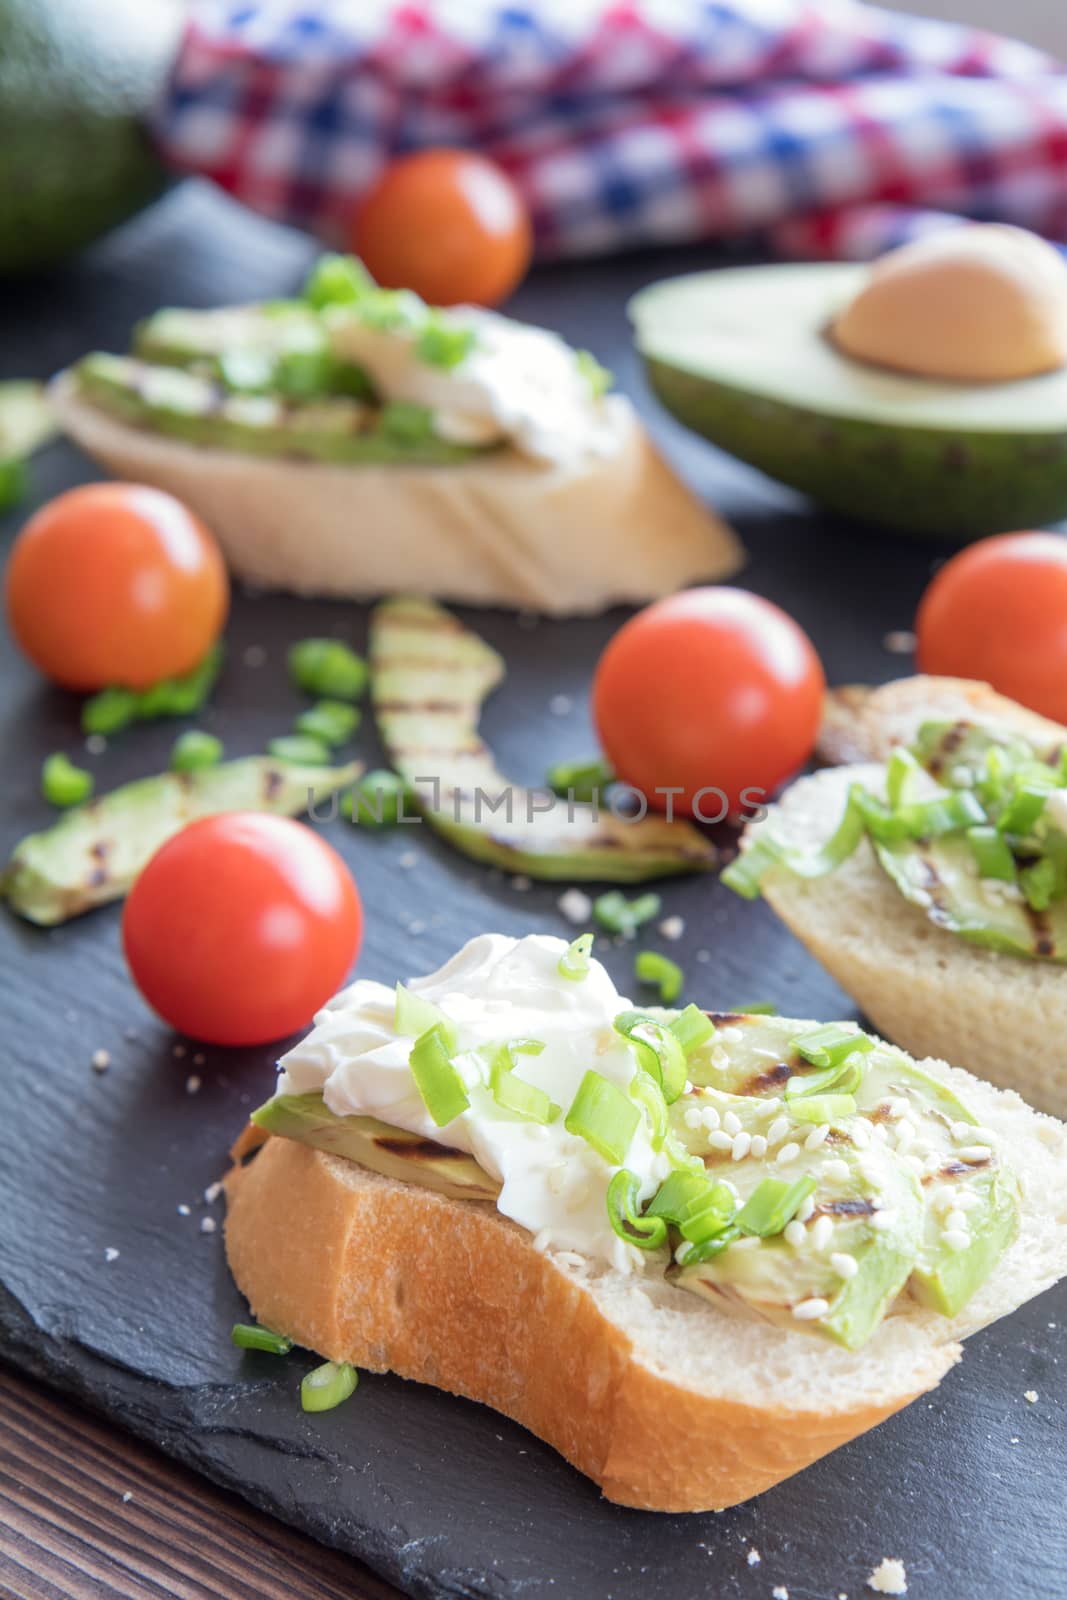 Bread with slices of avocado and cream cheese by ArtSvitlyna